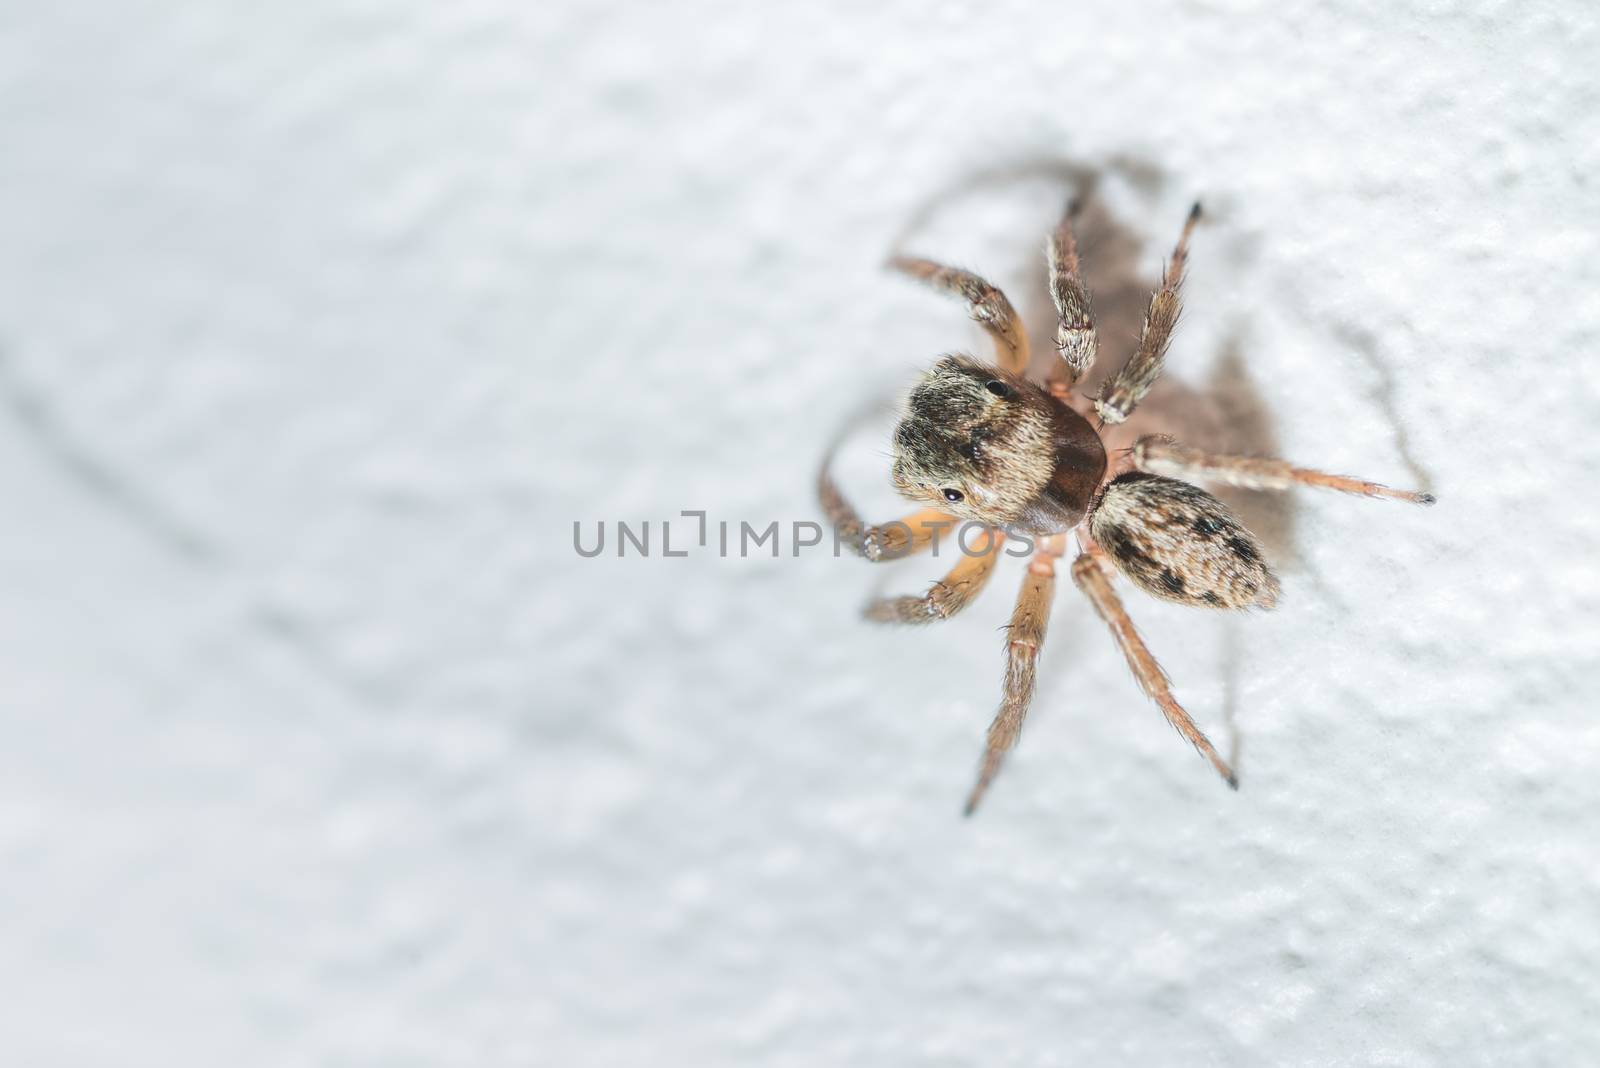 A macro shot of a small jumping spider from Kochi, Japan.